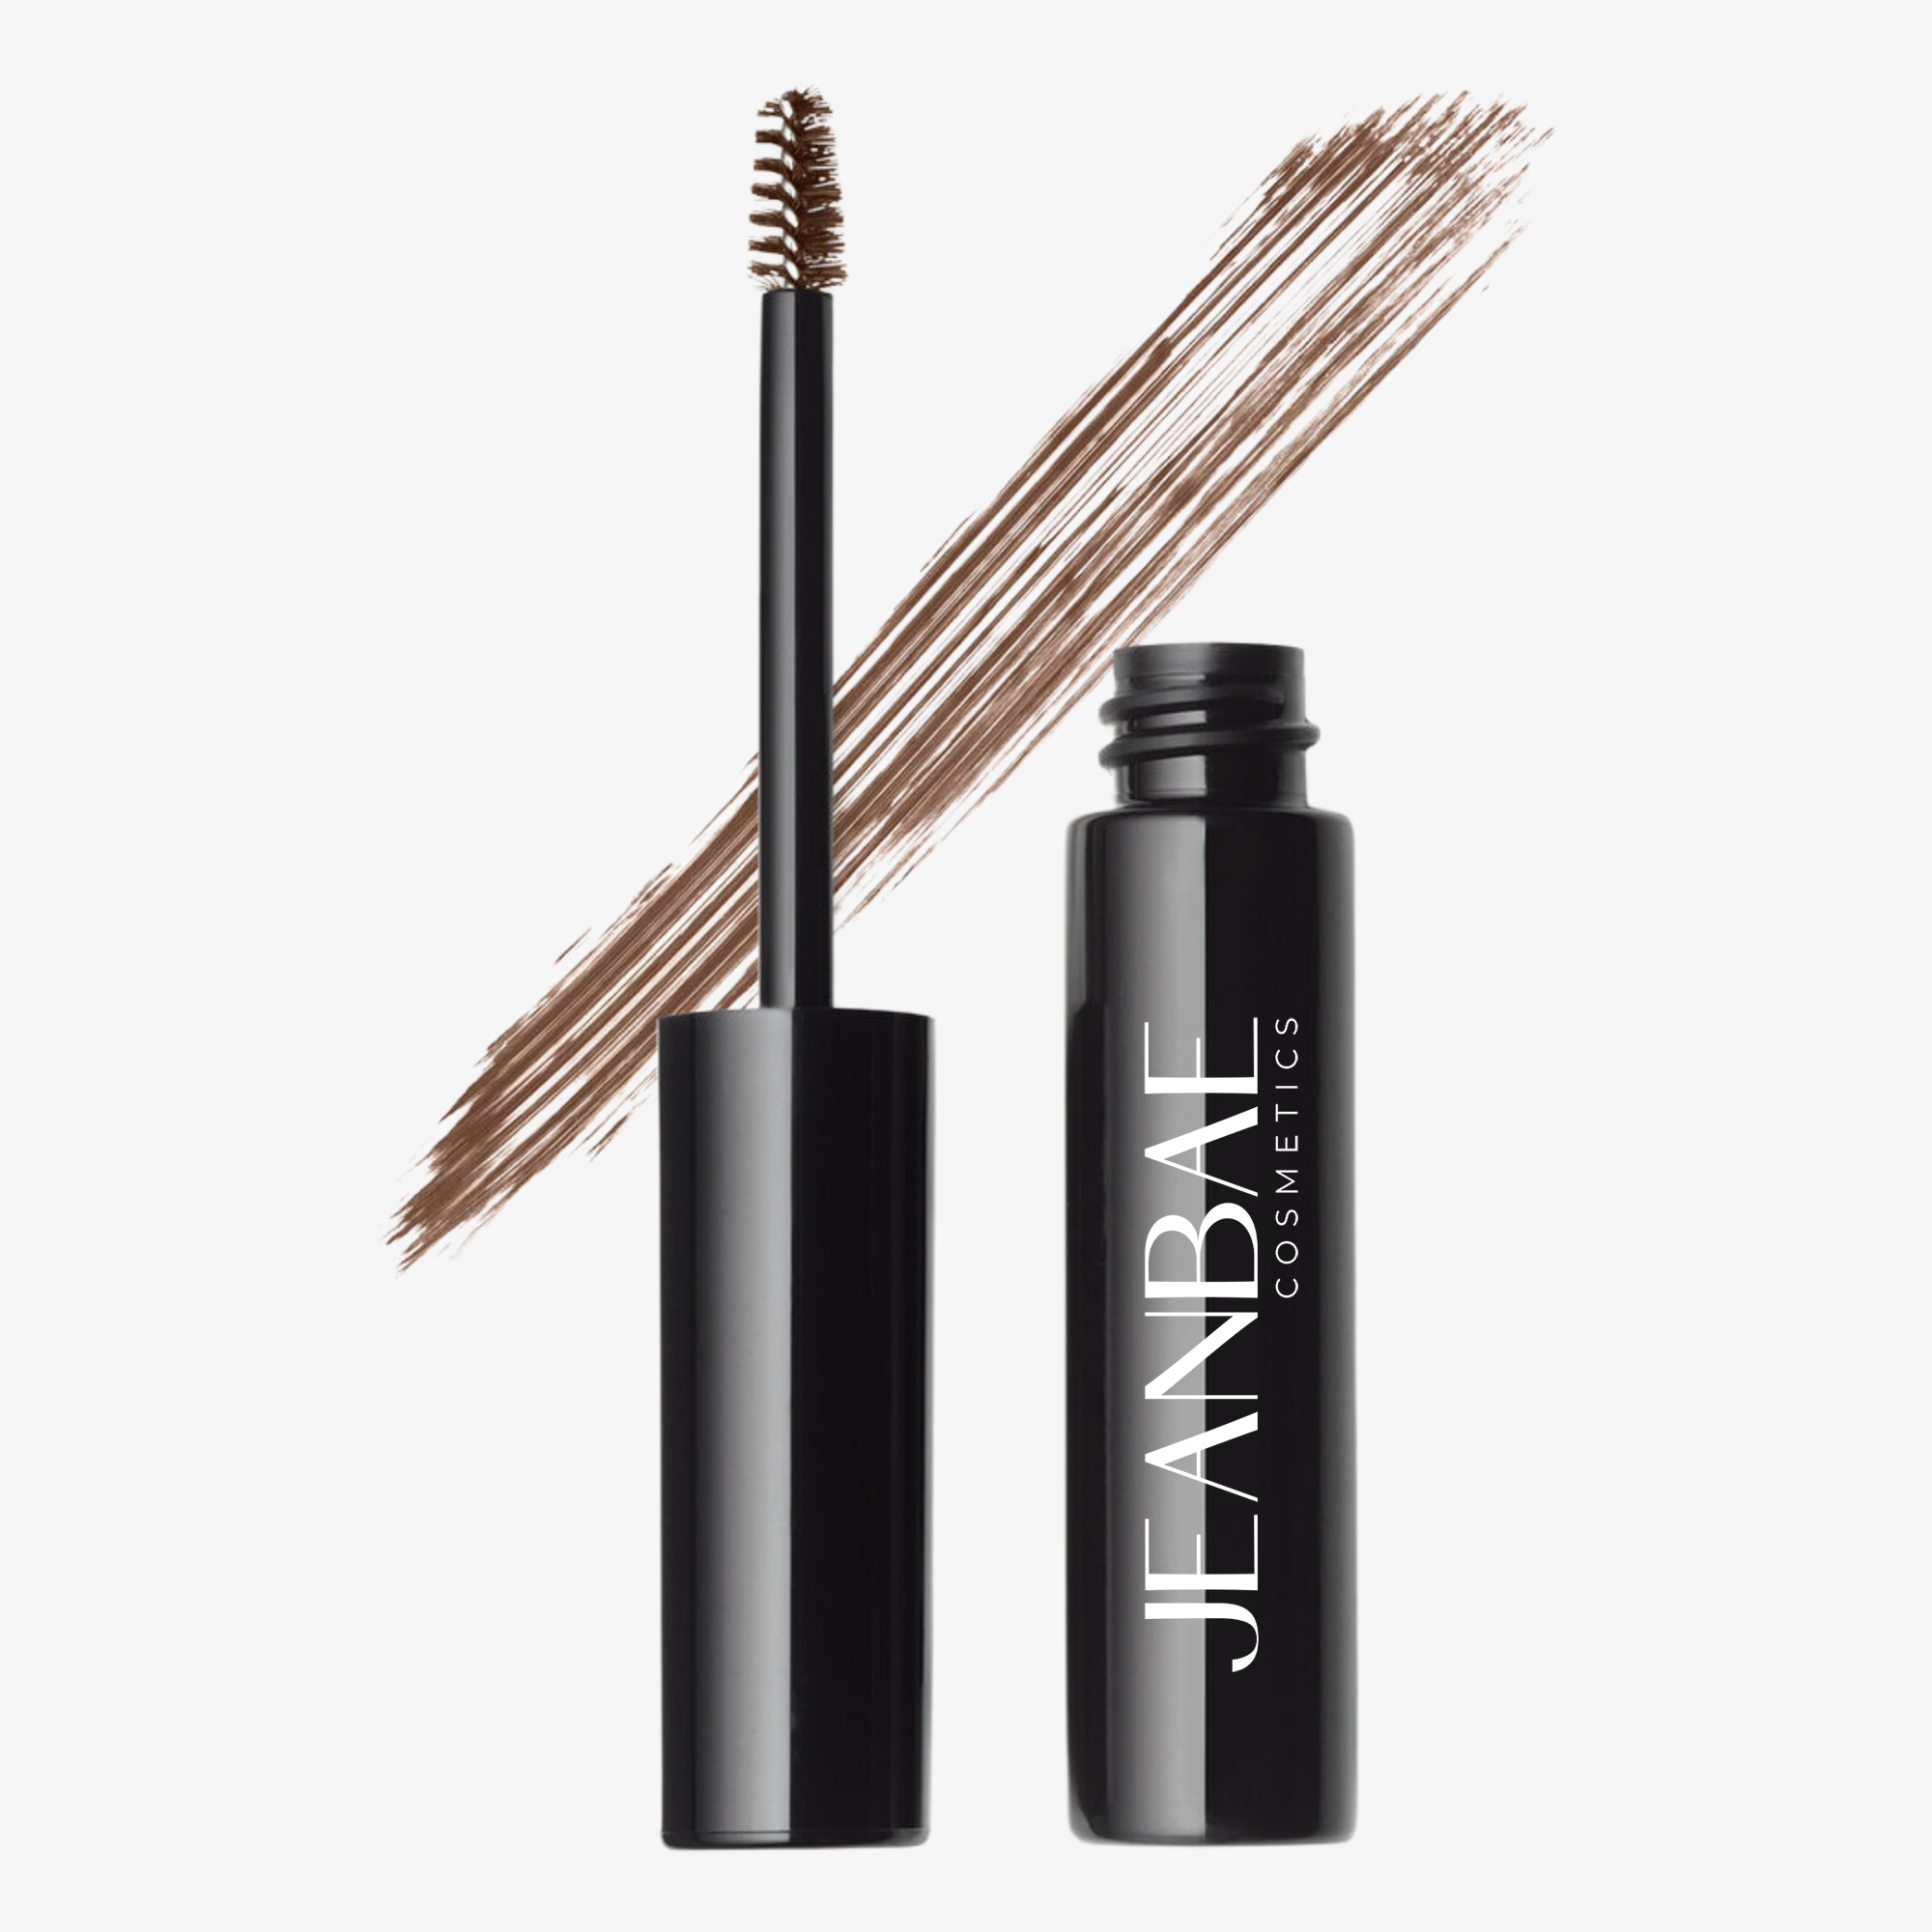 Soft-focus Nylon fibers deliver texturizing, lengthening, and volumizing effects to increase brows, leaving a thick and full appearance. THIS PRODUCT IS Cruelty-Free, E.U. Registered, and Made in the USA. Formulated without Alcohol, Barley, Corn, Oats, Rye, Soy, Spelt or Wheat. Free Of Parabens and Fragrance.